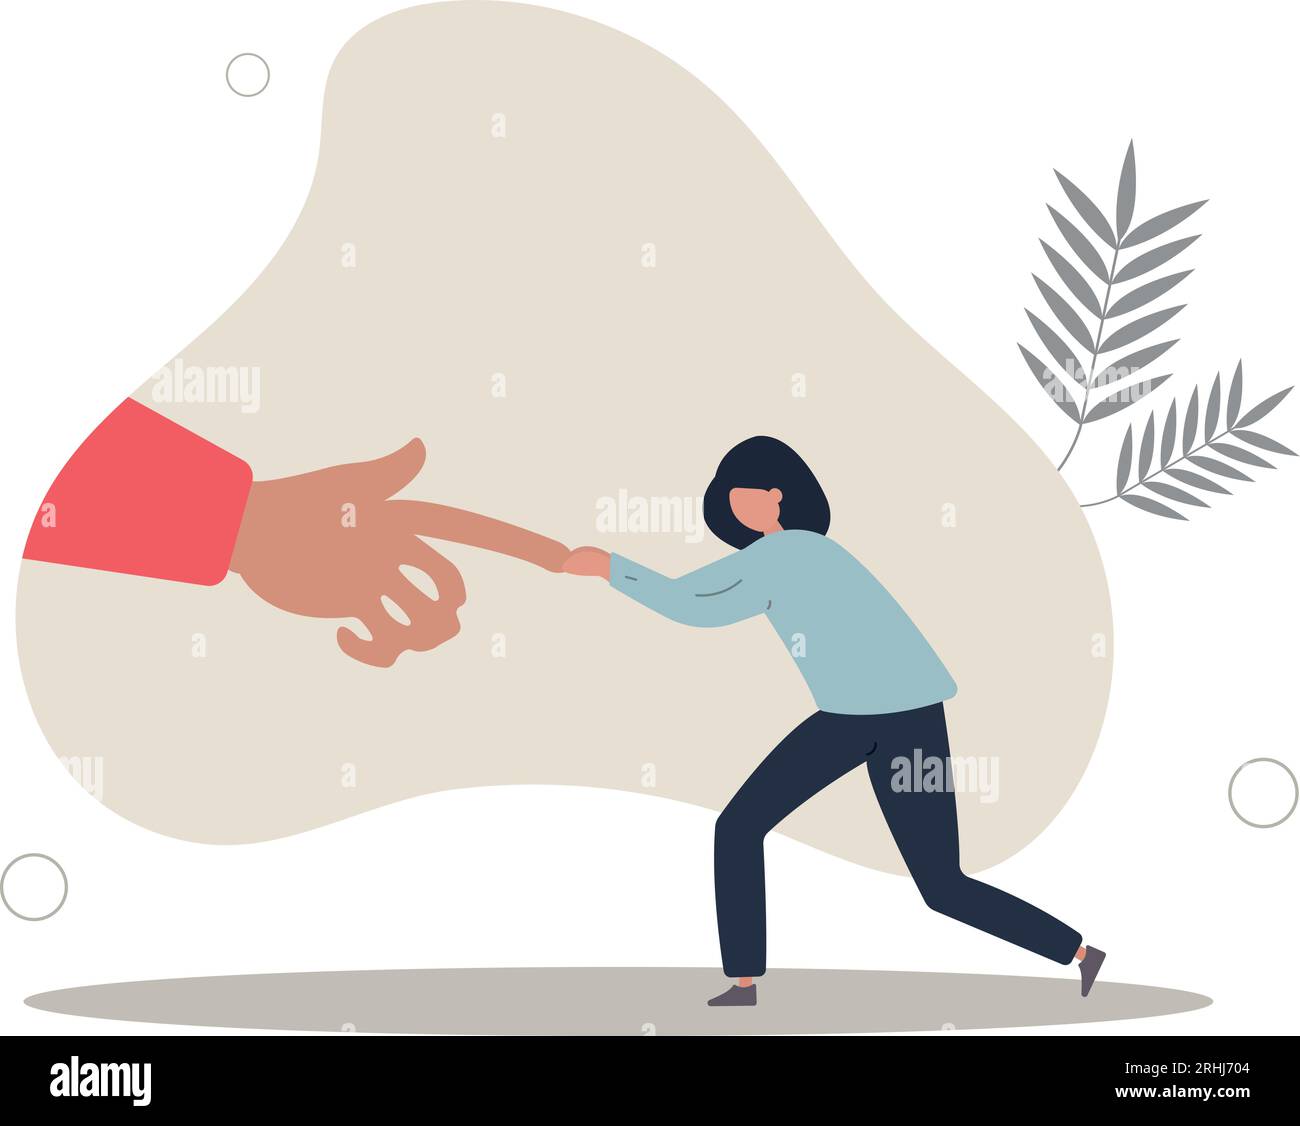 Conflict against boss or employer, david and goliath, fight against super power people, challenge and ambition to do right thing.flat vector illustrat Stock Vector